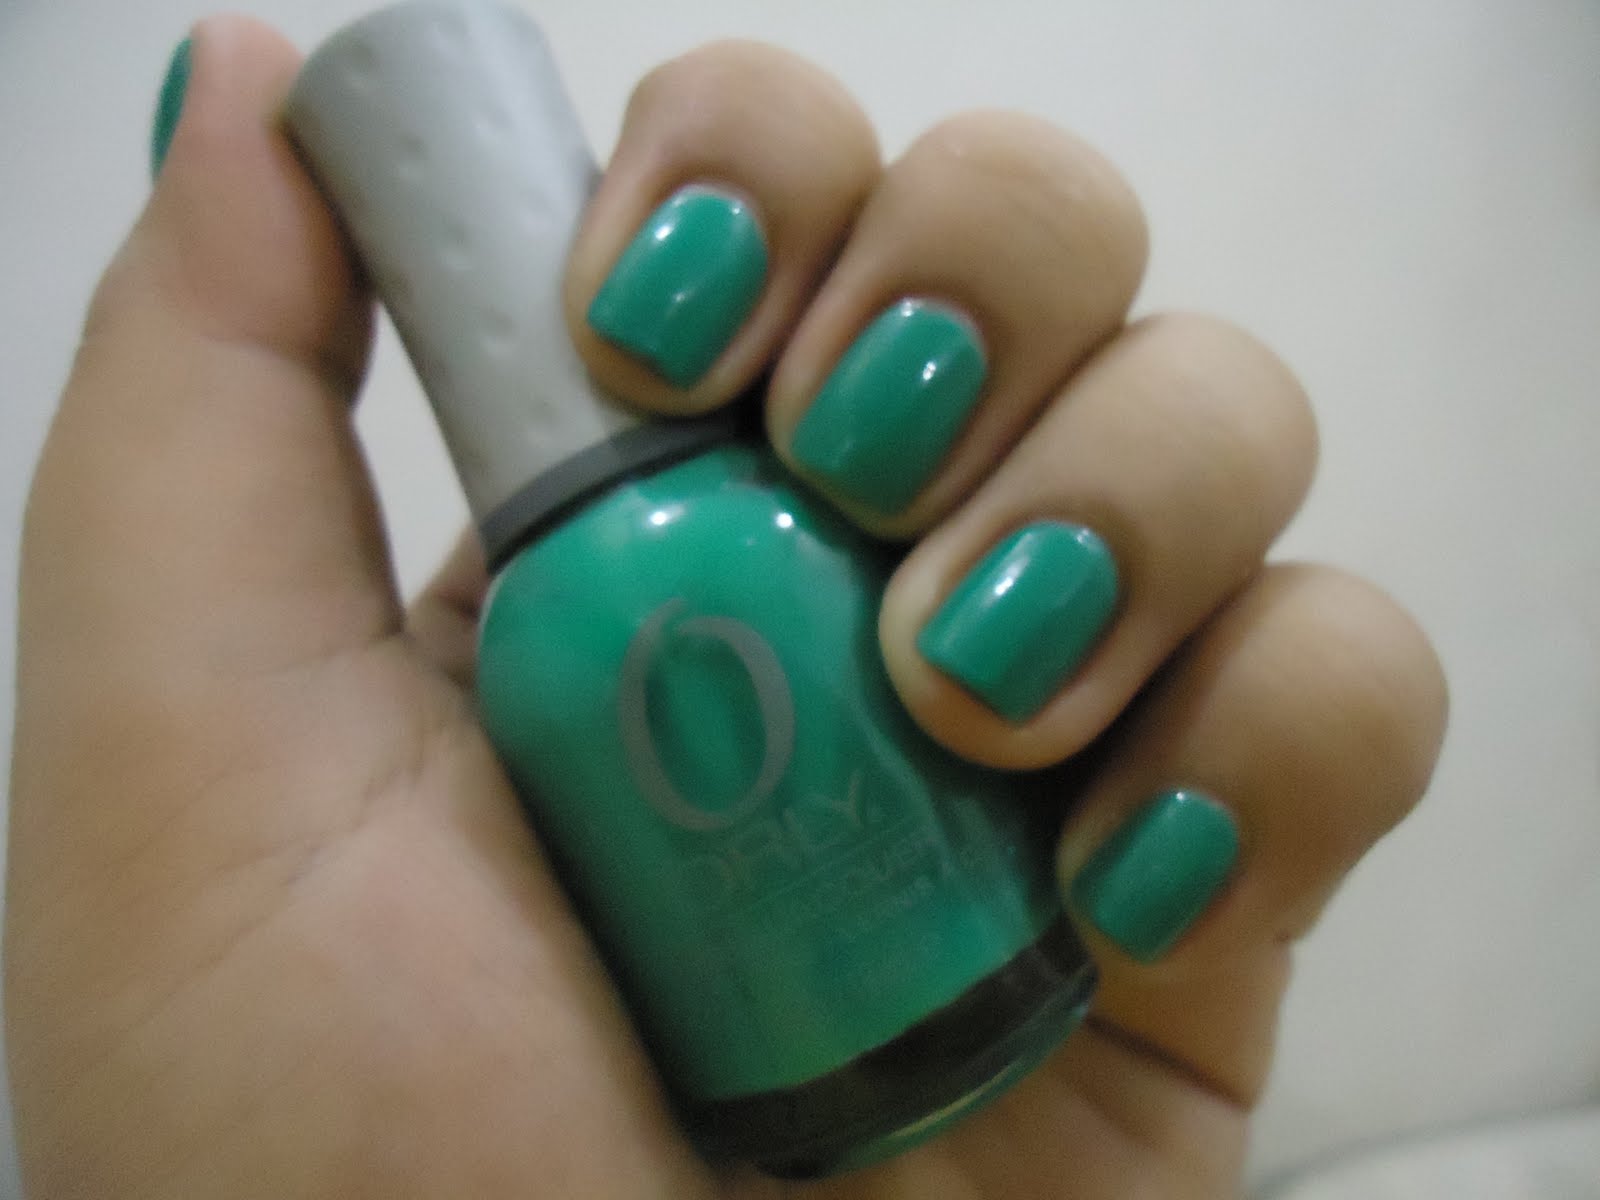 6. Orly Nail Lacquer in "Green with Envy" - wide 8